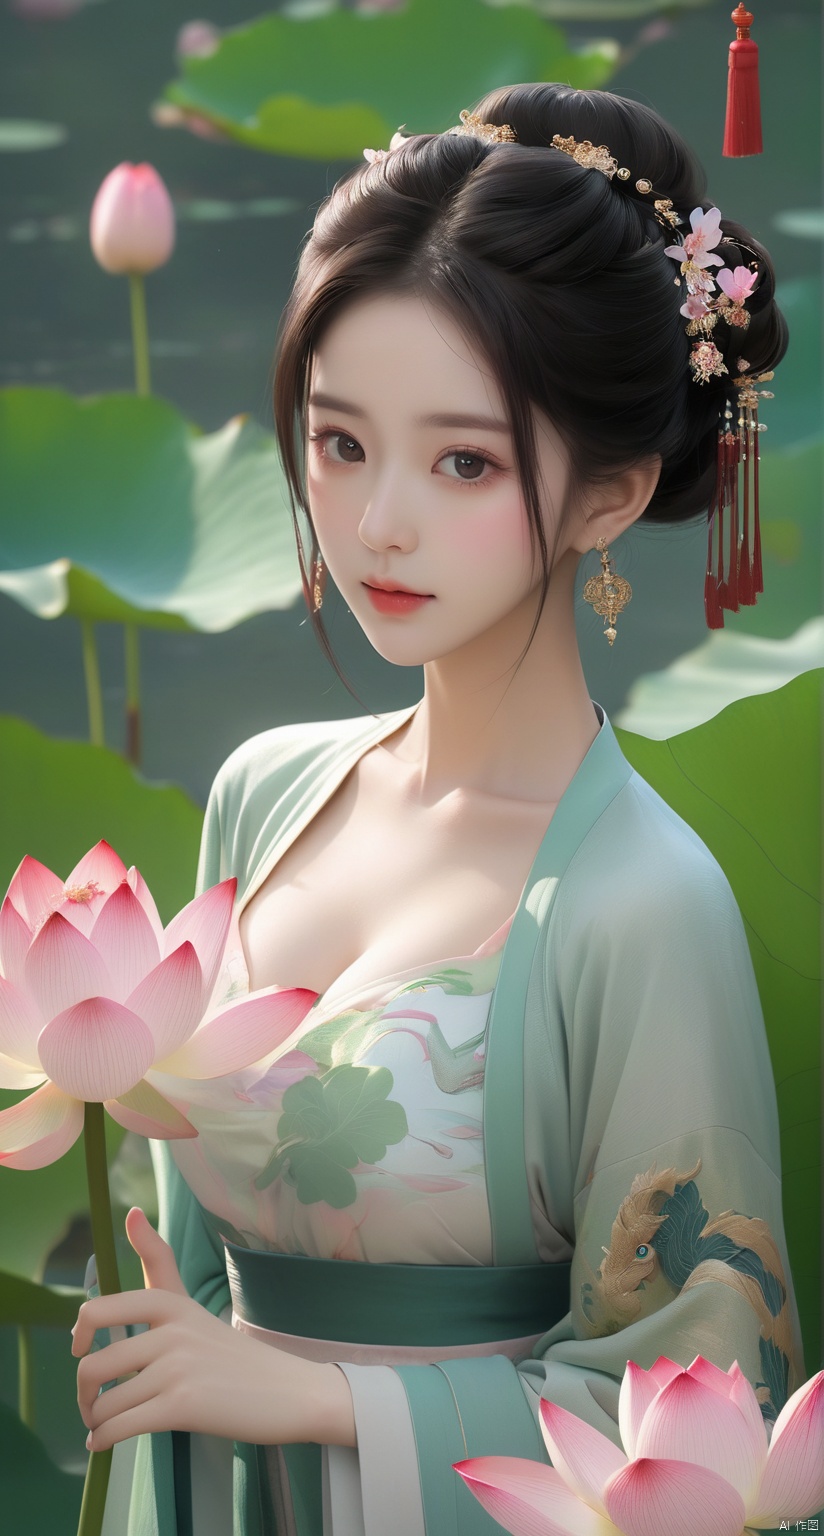  Best quality, Realistic, photorealistic, masterpiece, extremely detailed CG unity 8k wallpaper, best illumination, best shadow, huge filesize ,(huge breasts:2.3) incredibly absurdres, absurdres, looking at viewer, transparent, smog, gauze, vase, petals, room, ancient Chinese style, detailed background, wide shot background,
(((1gilr,black hair))),(Sitting on the lotus pond porch:1.39) ,(huge breasts:2.4),(A pond full of pink lotus flowers:1.3),close up of 1girl,Hairpins,hair ornament,hair wings,slim,narrow waist,(huge breasts:2.5),perfect eyes,beautiful perfect face,pleasant smile,perfect female figure,detailed skin,charming,alluring,seductive,erotic,enchanting,delicate pattern,detailed complex and rich exquisite clothing detail,delicate intricate fabrics,
Morning Serenade In the gentle morning glow, (a woman in a pink lotus-patterned Hanfu stands in an indoor courtyard:1.26),(Chinese traditional dragon and phoenix embroidered Hanfu:1.3), admiring the tranquil garden scenery. The lotus-patterned Hanfu, embellished with silver-thread embroidery, is softly illuminated by the morning light. The light mint green Hanfu imparts a sense of calm and freshness, adorned with delicate lotus patterns, with a blurred background to enhance the peaceful atmosphere,(huge breasts:2.7), puregirl, g009